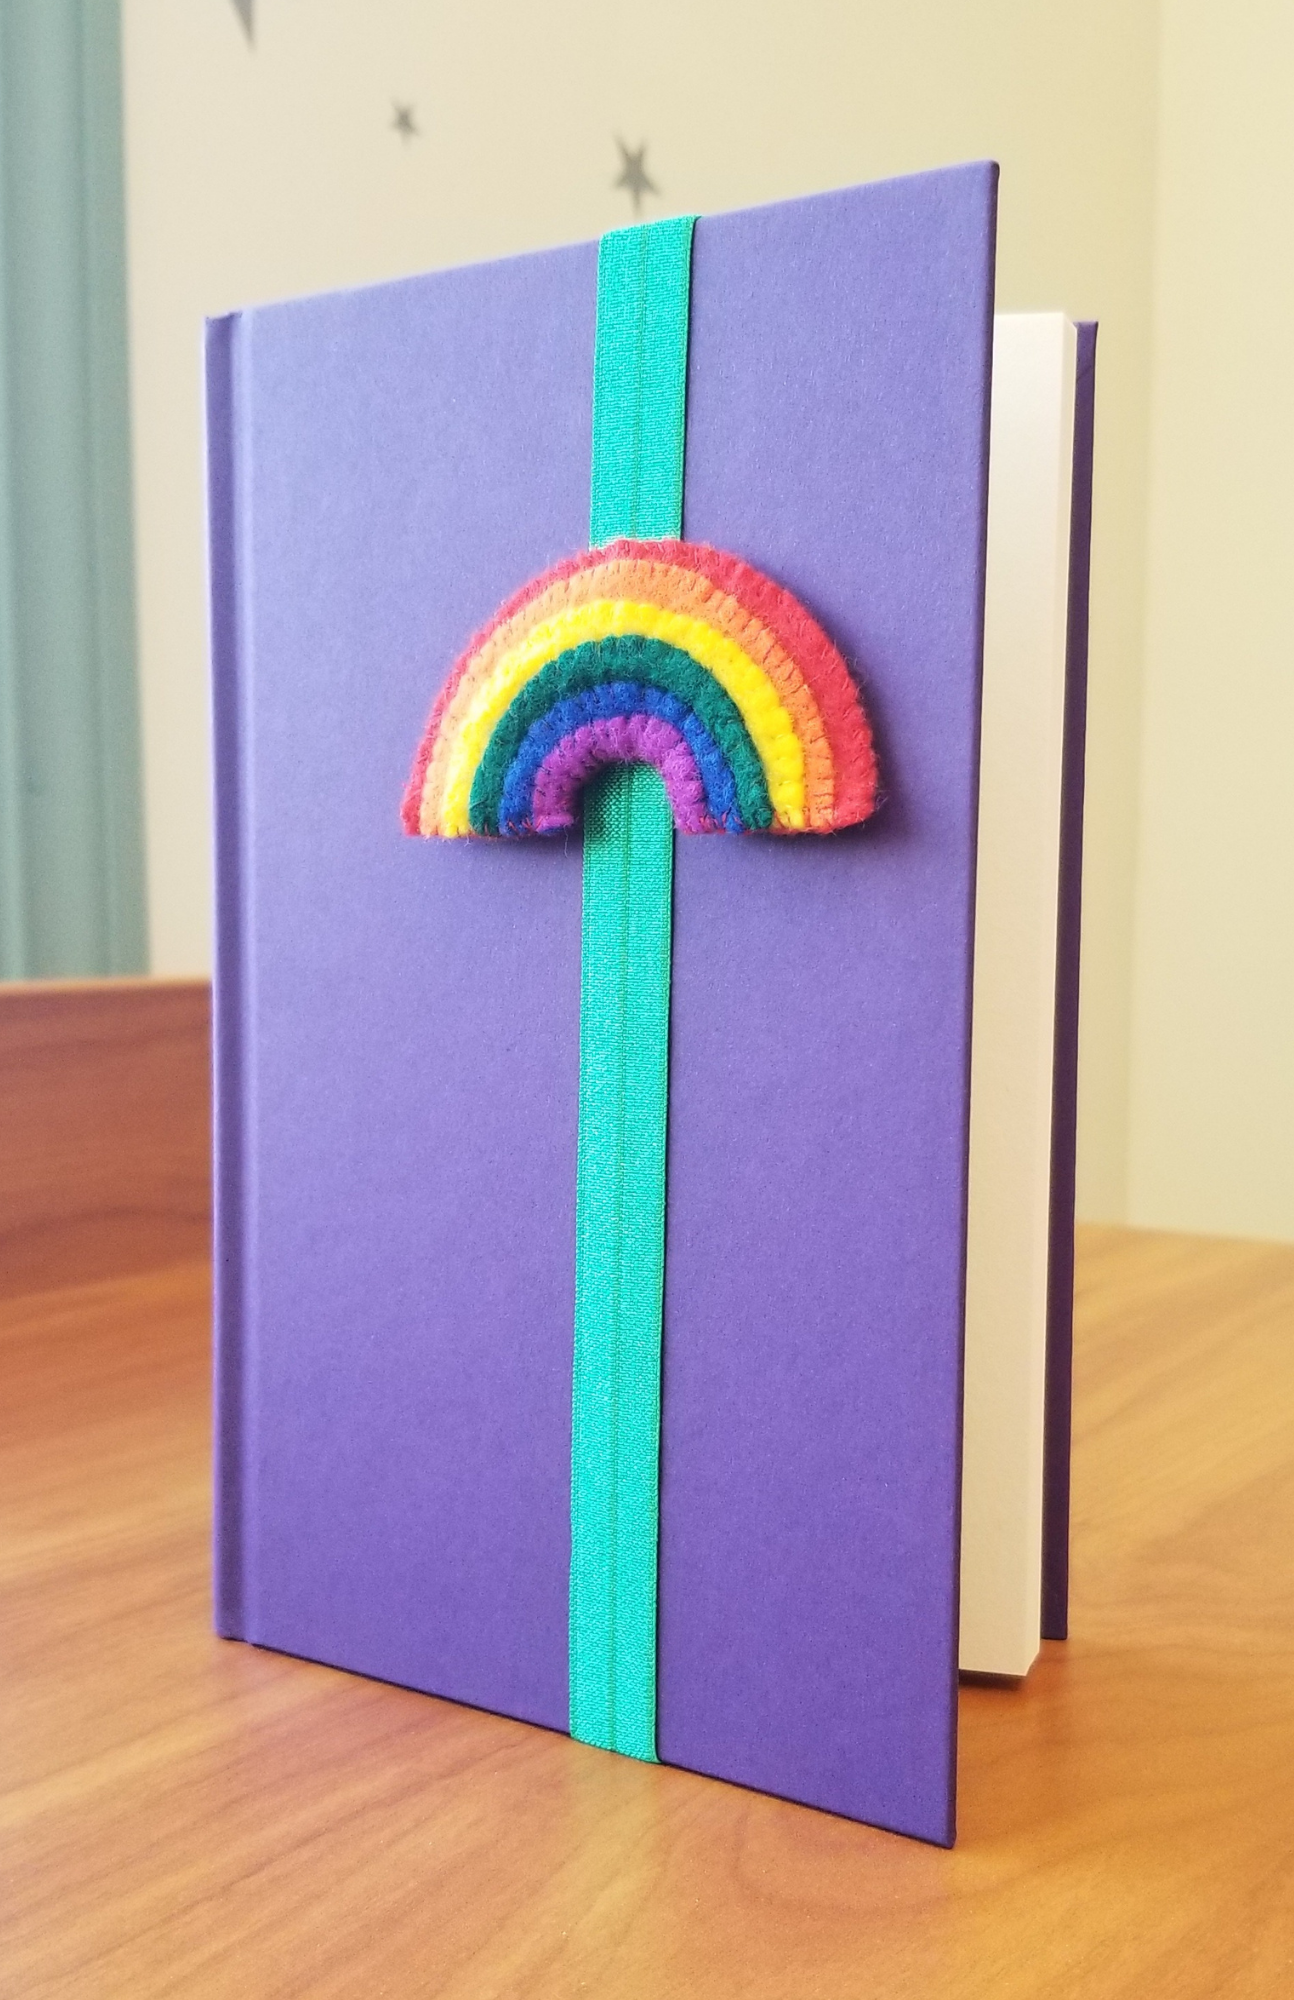 A bookmark made of elastic wrapped around a book cover to hold the reader's place; there is a cartoony felt rainbow attached to the front of the bookmark